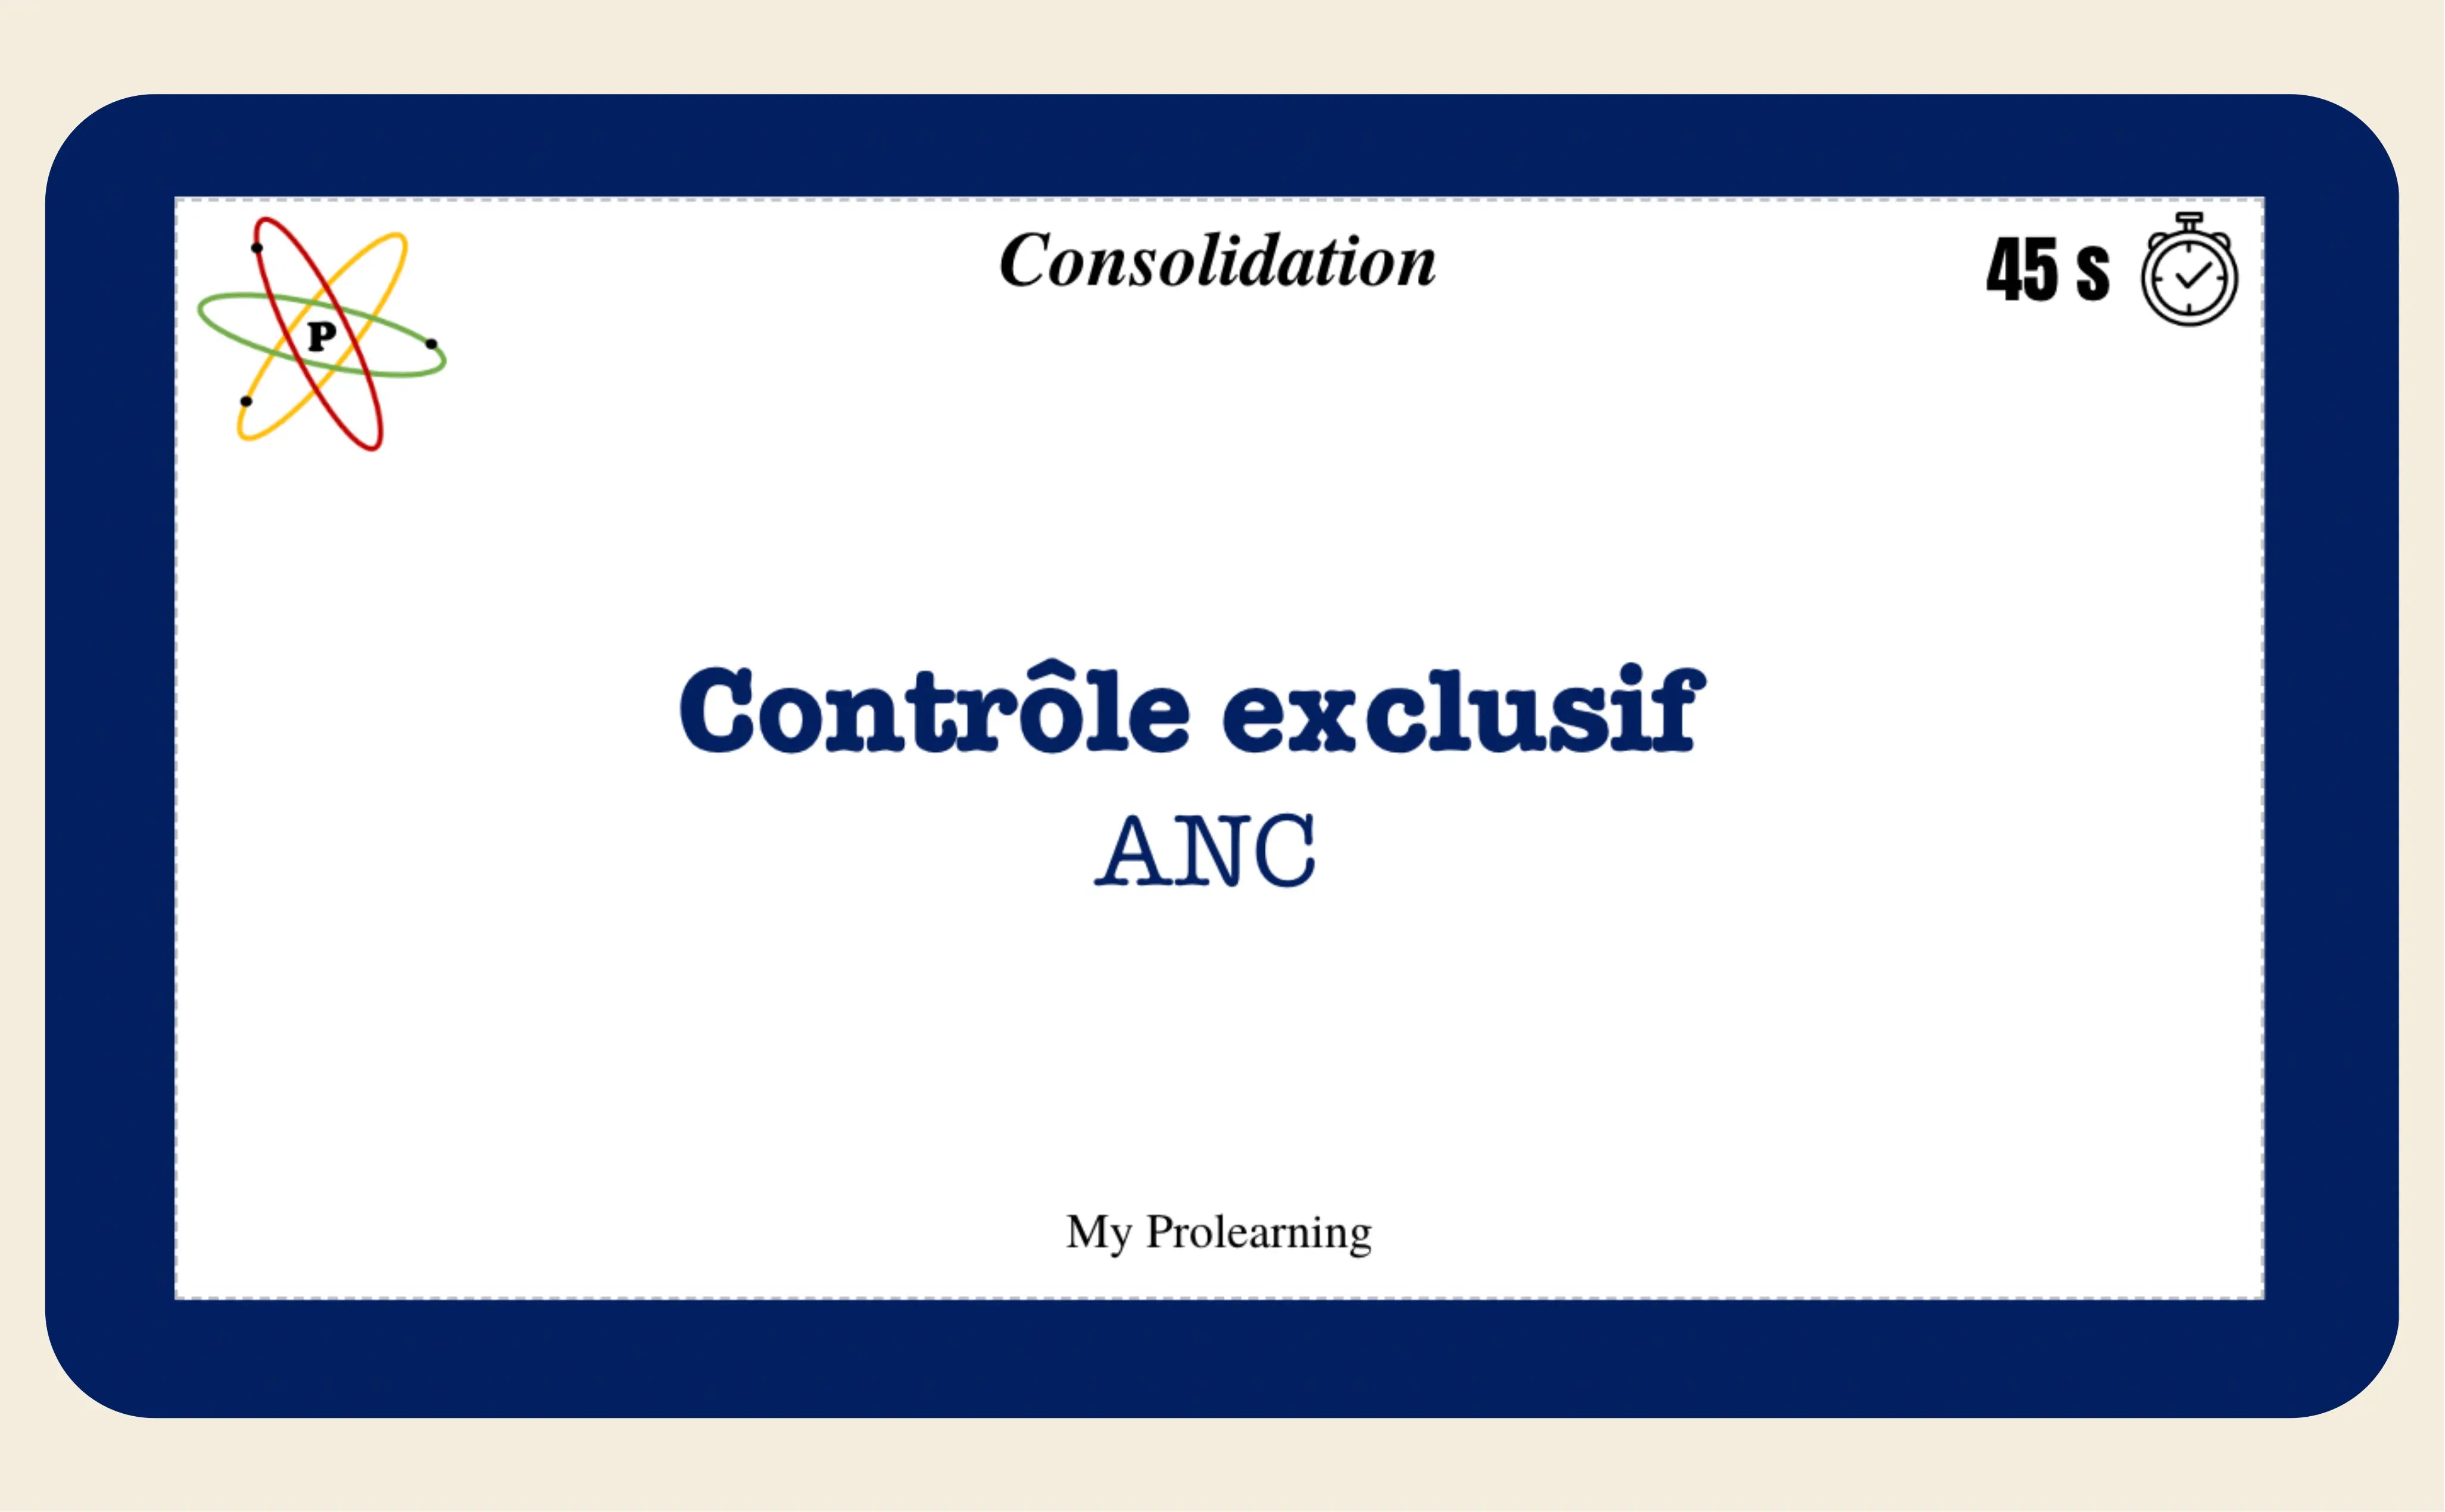 FICHES OPÉRATIONS DE CONSOLIDATION - My Prolearning 